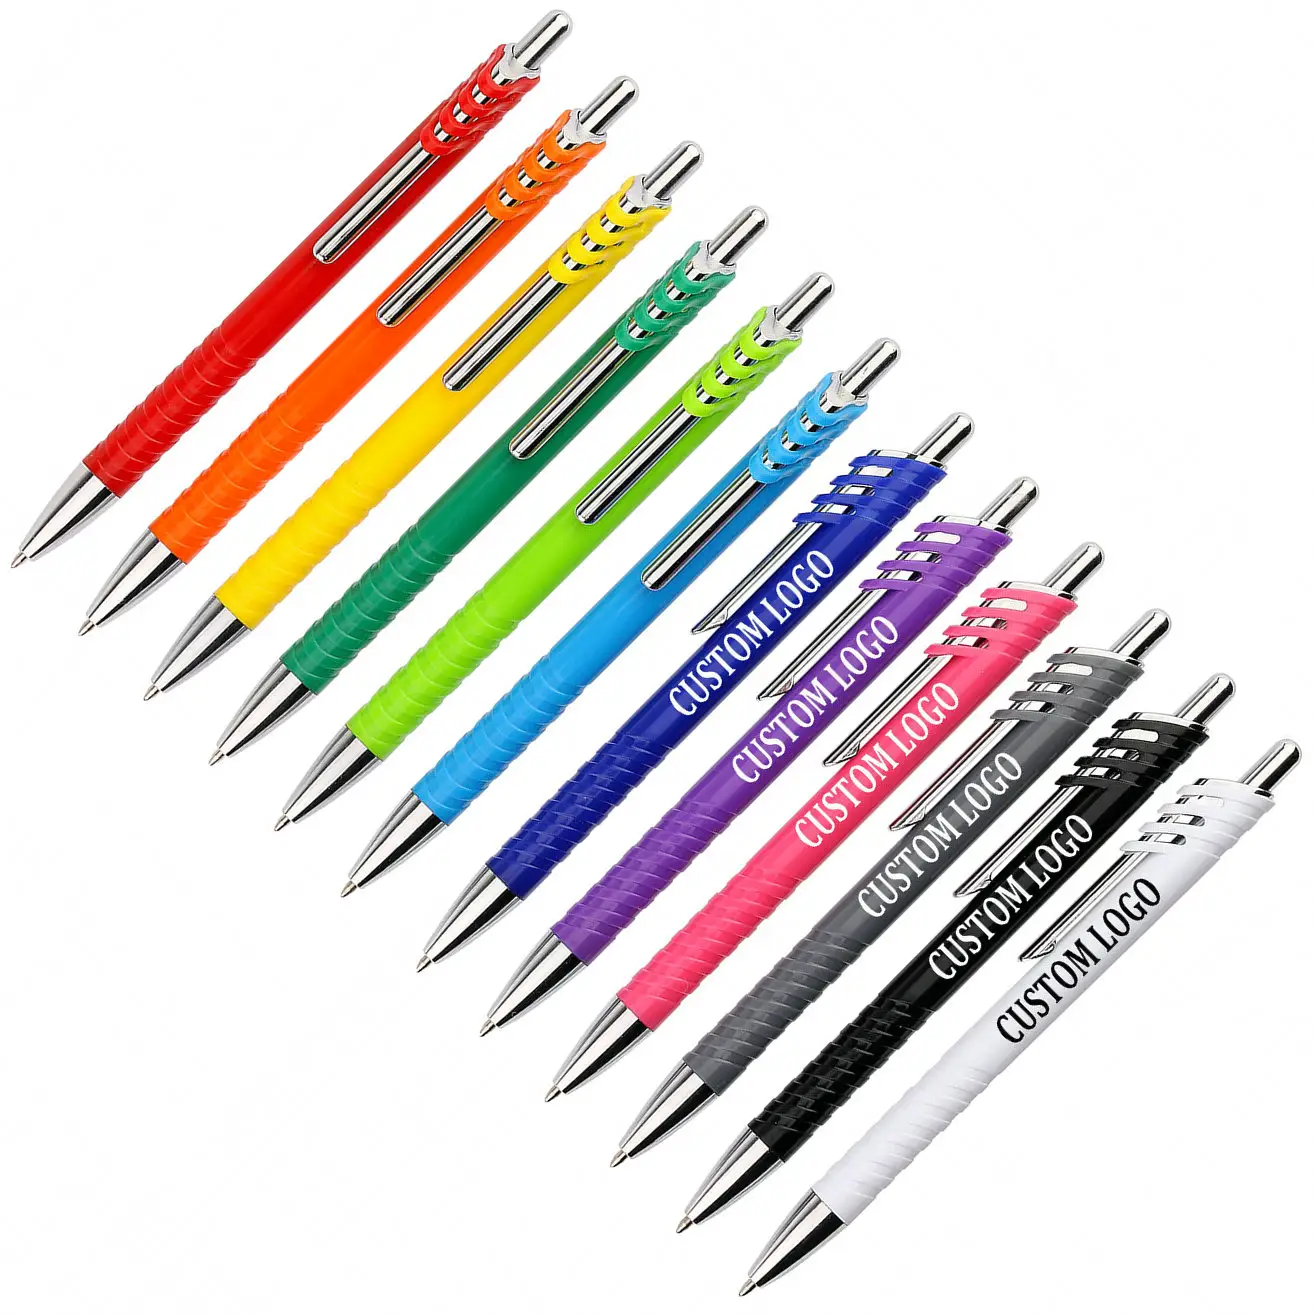 2022 new promotional ball pen model,simple cheap customized plastic retractable ballpoint pens with black or blue ink wholesales